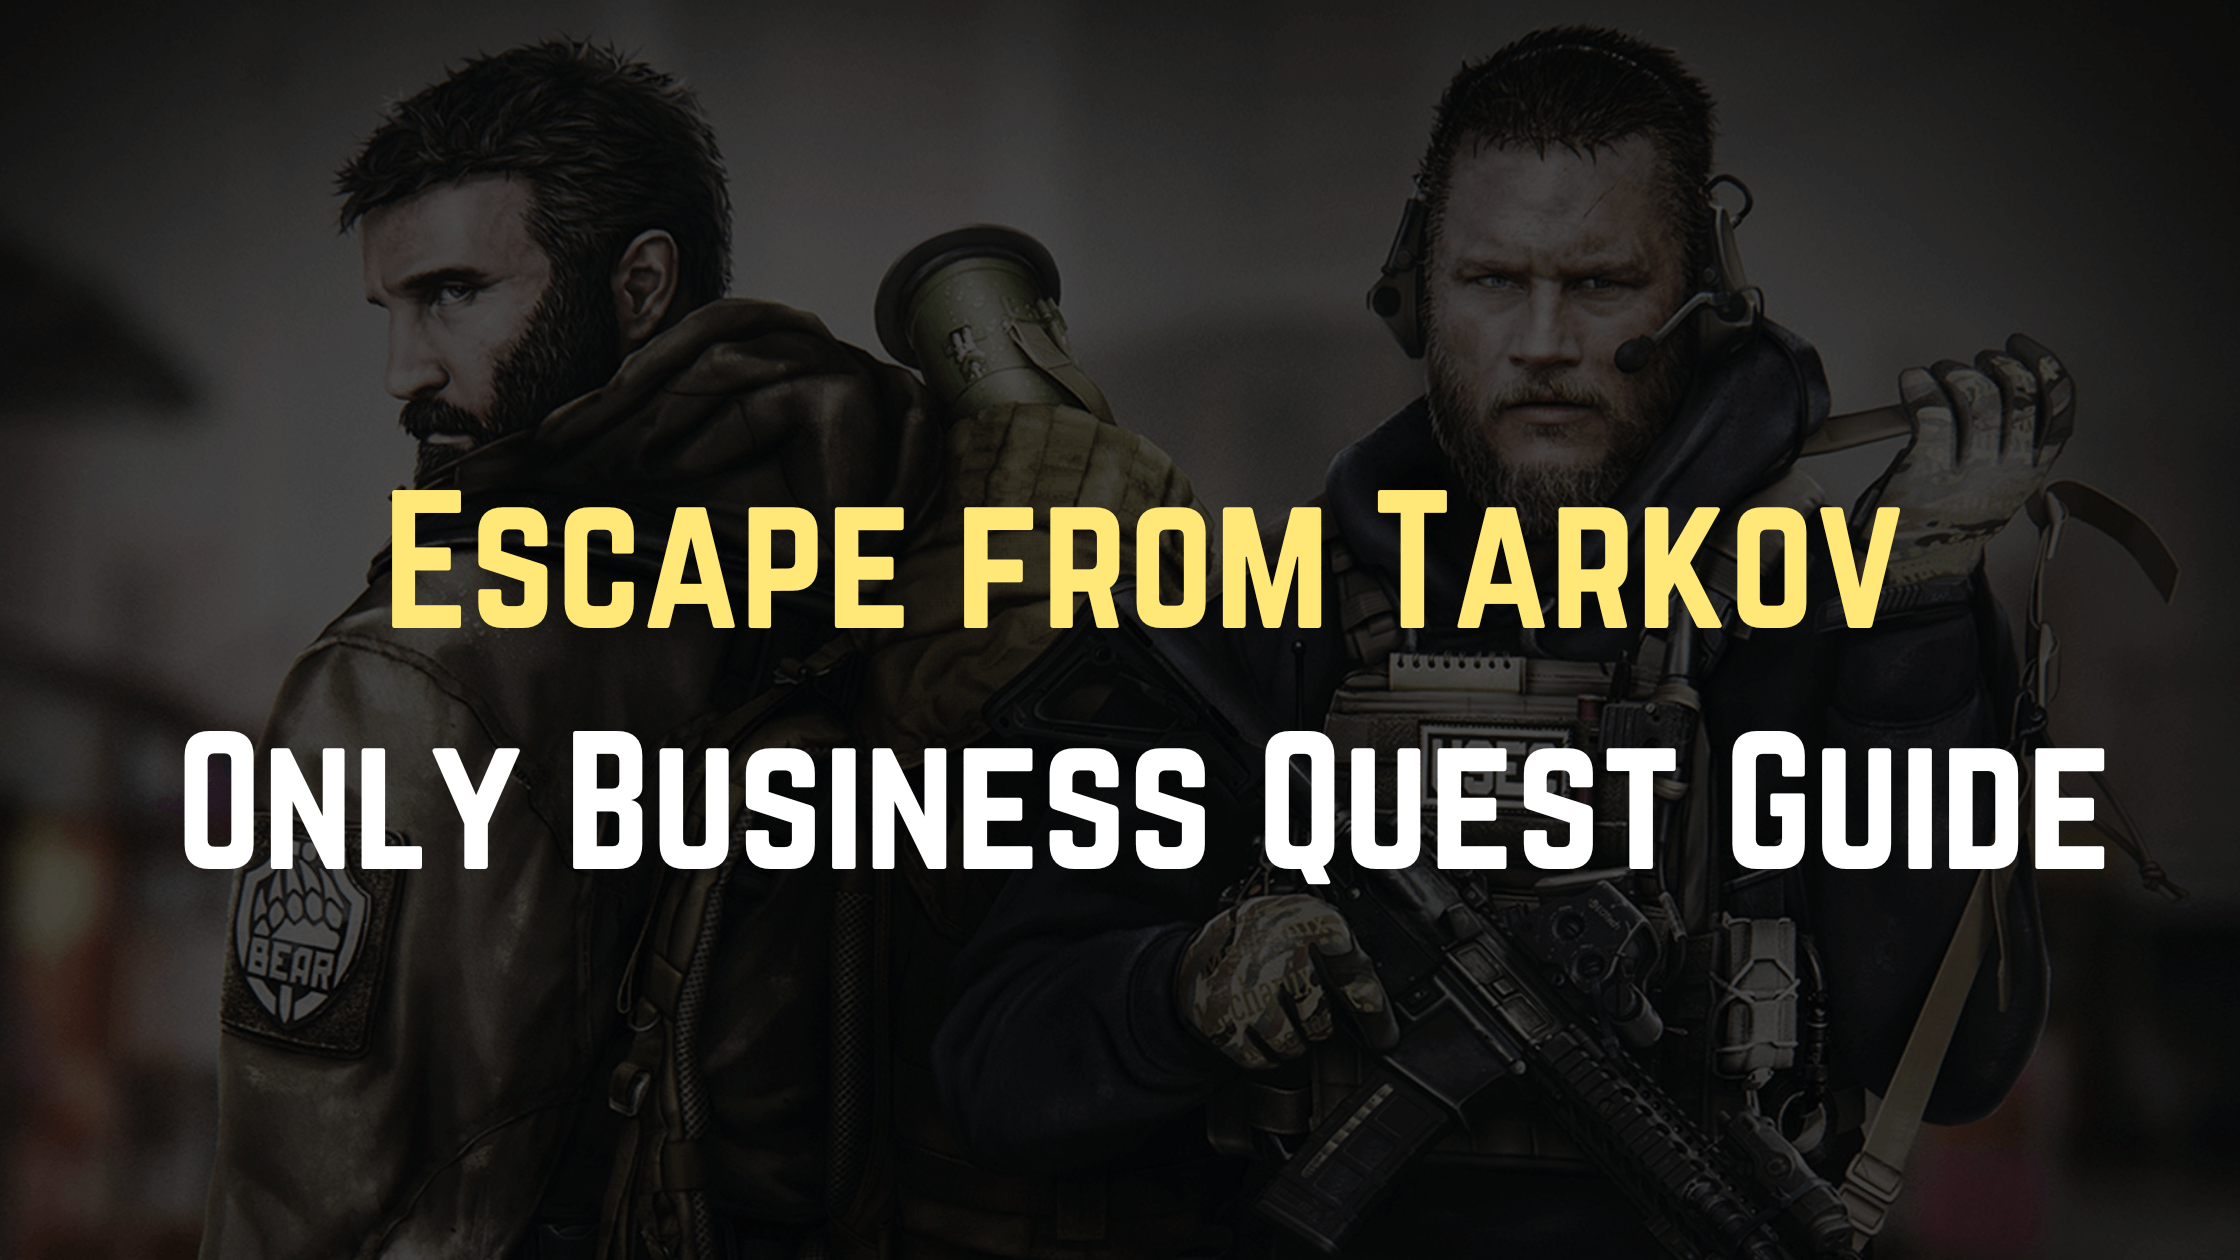 Escape from Tarkov Only Business Quest Guide